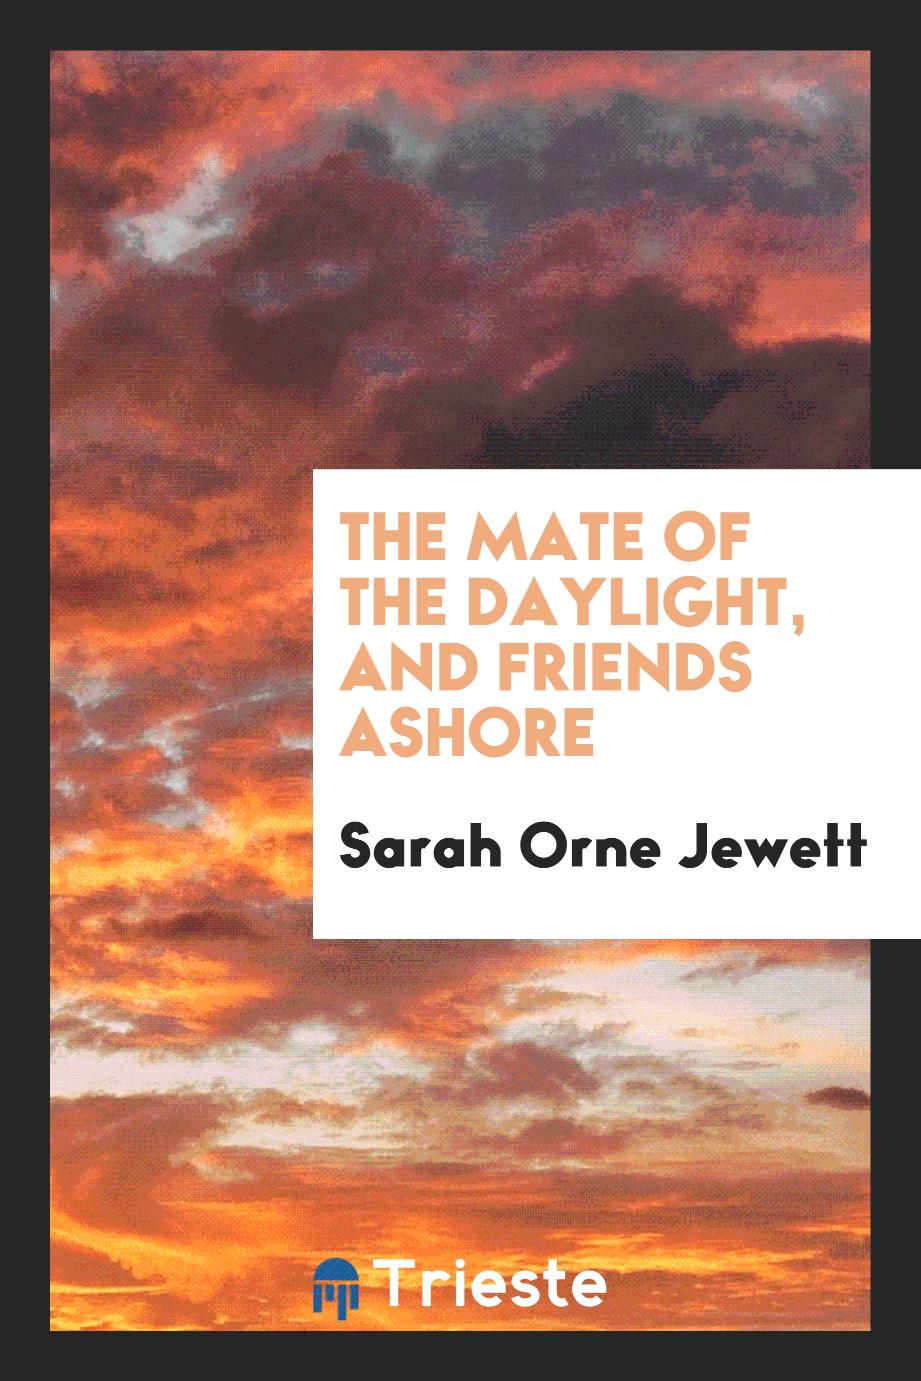 Sarah Orne Jewett - The mate of the Daylight, and friends ashore